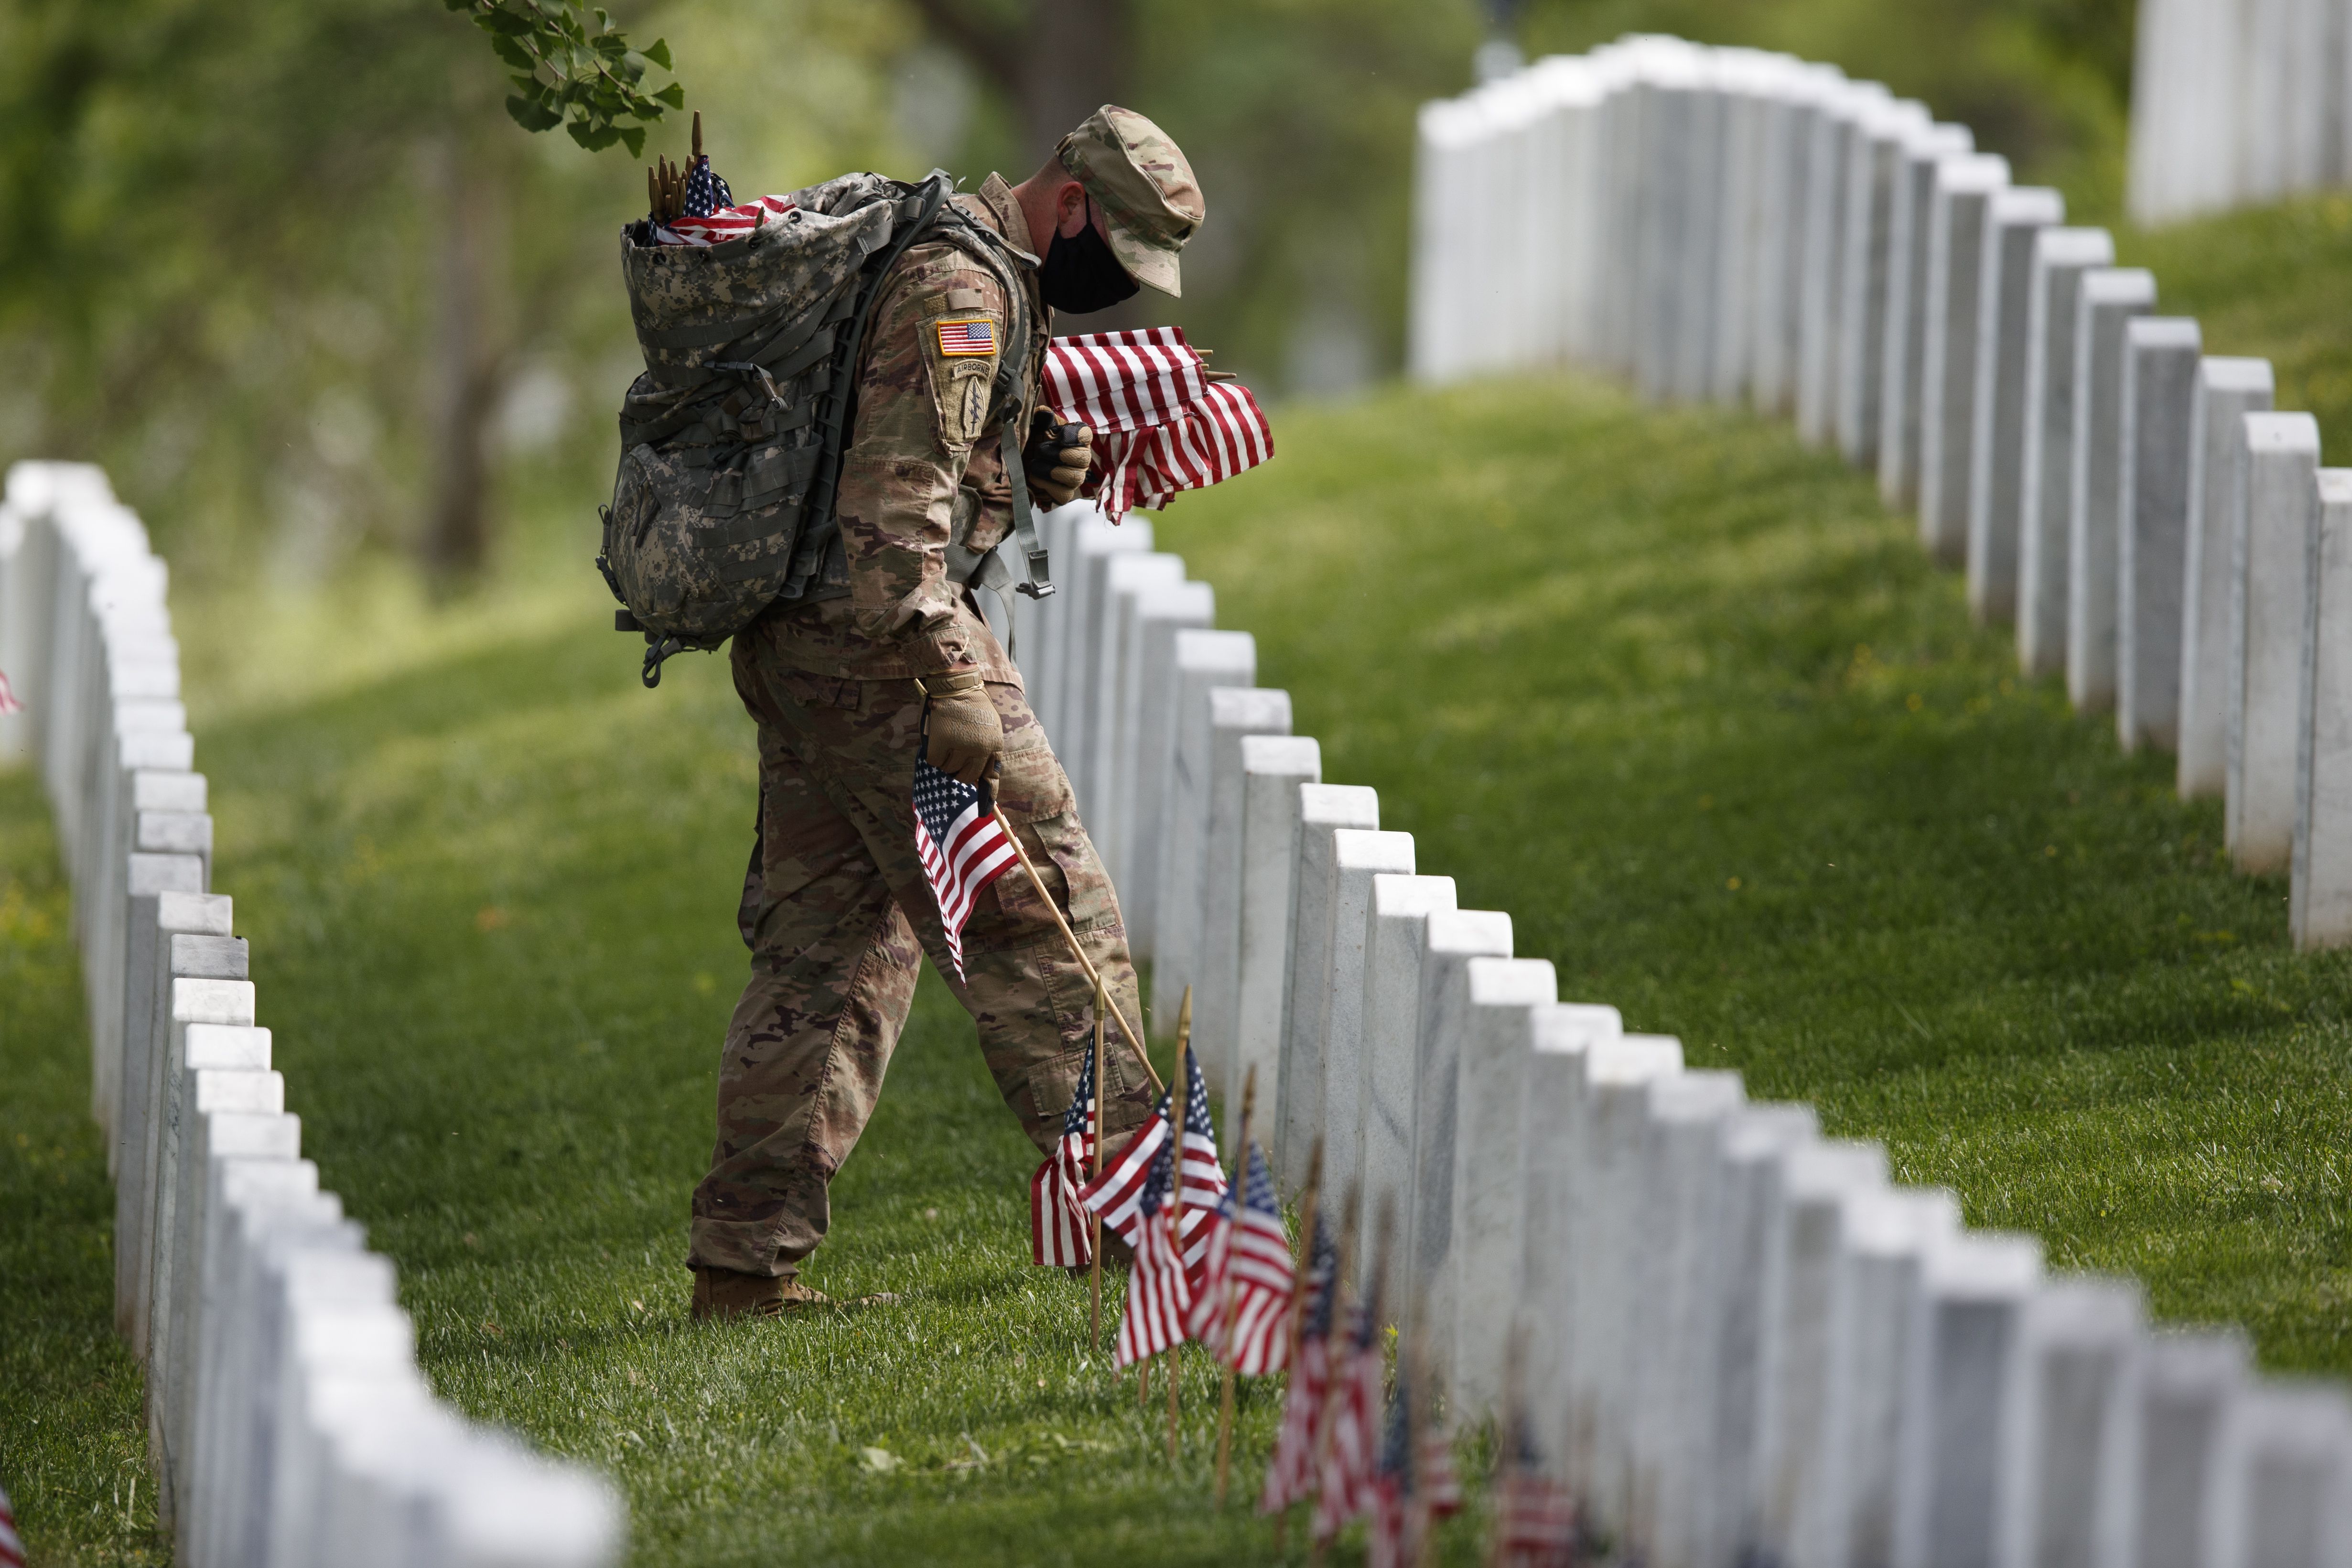 A uniformed soldier plants small American flags on graves 